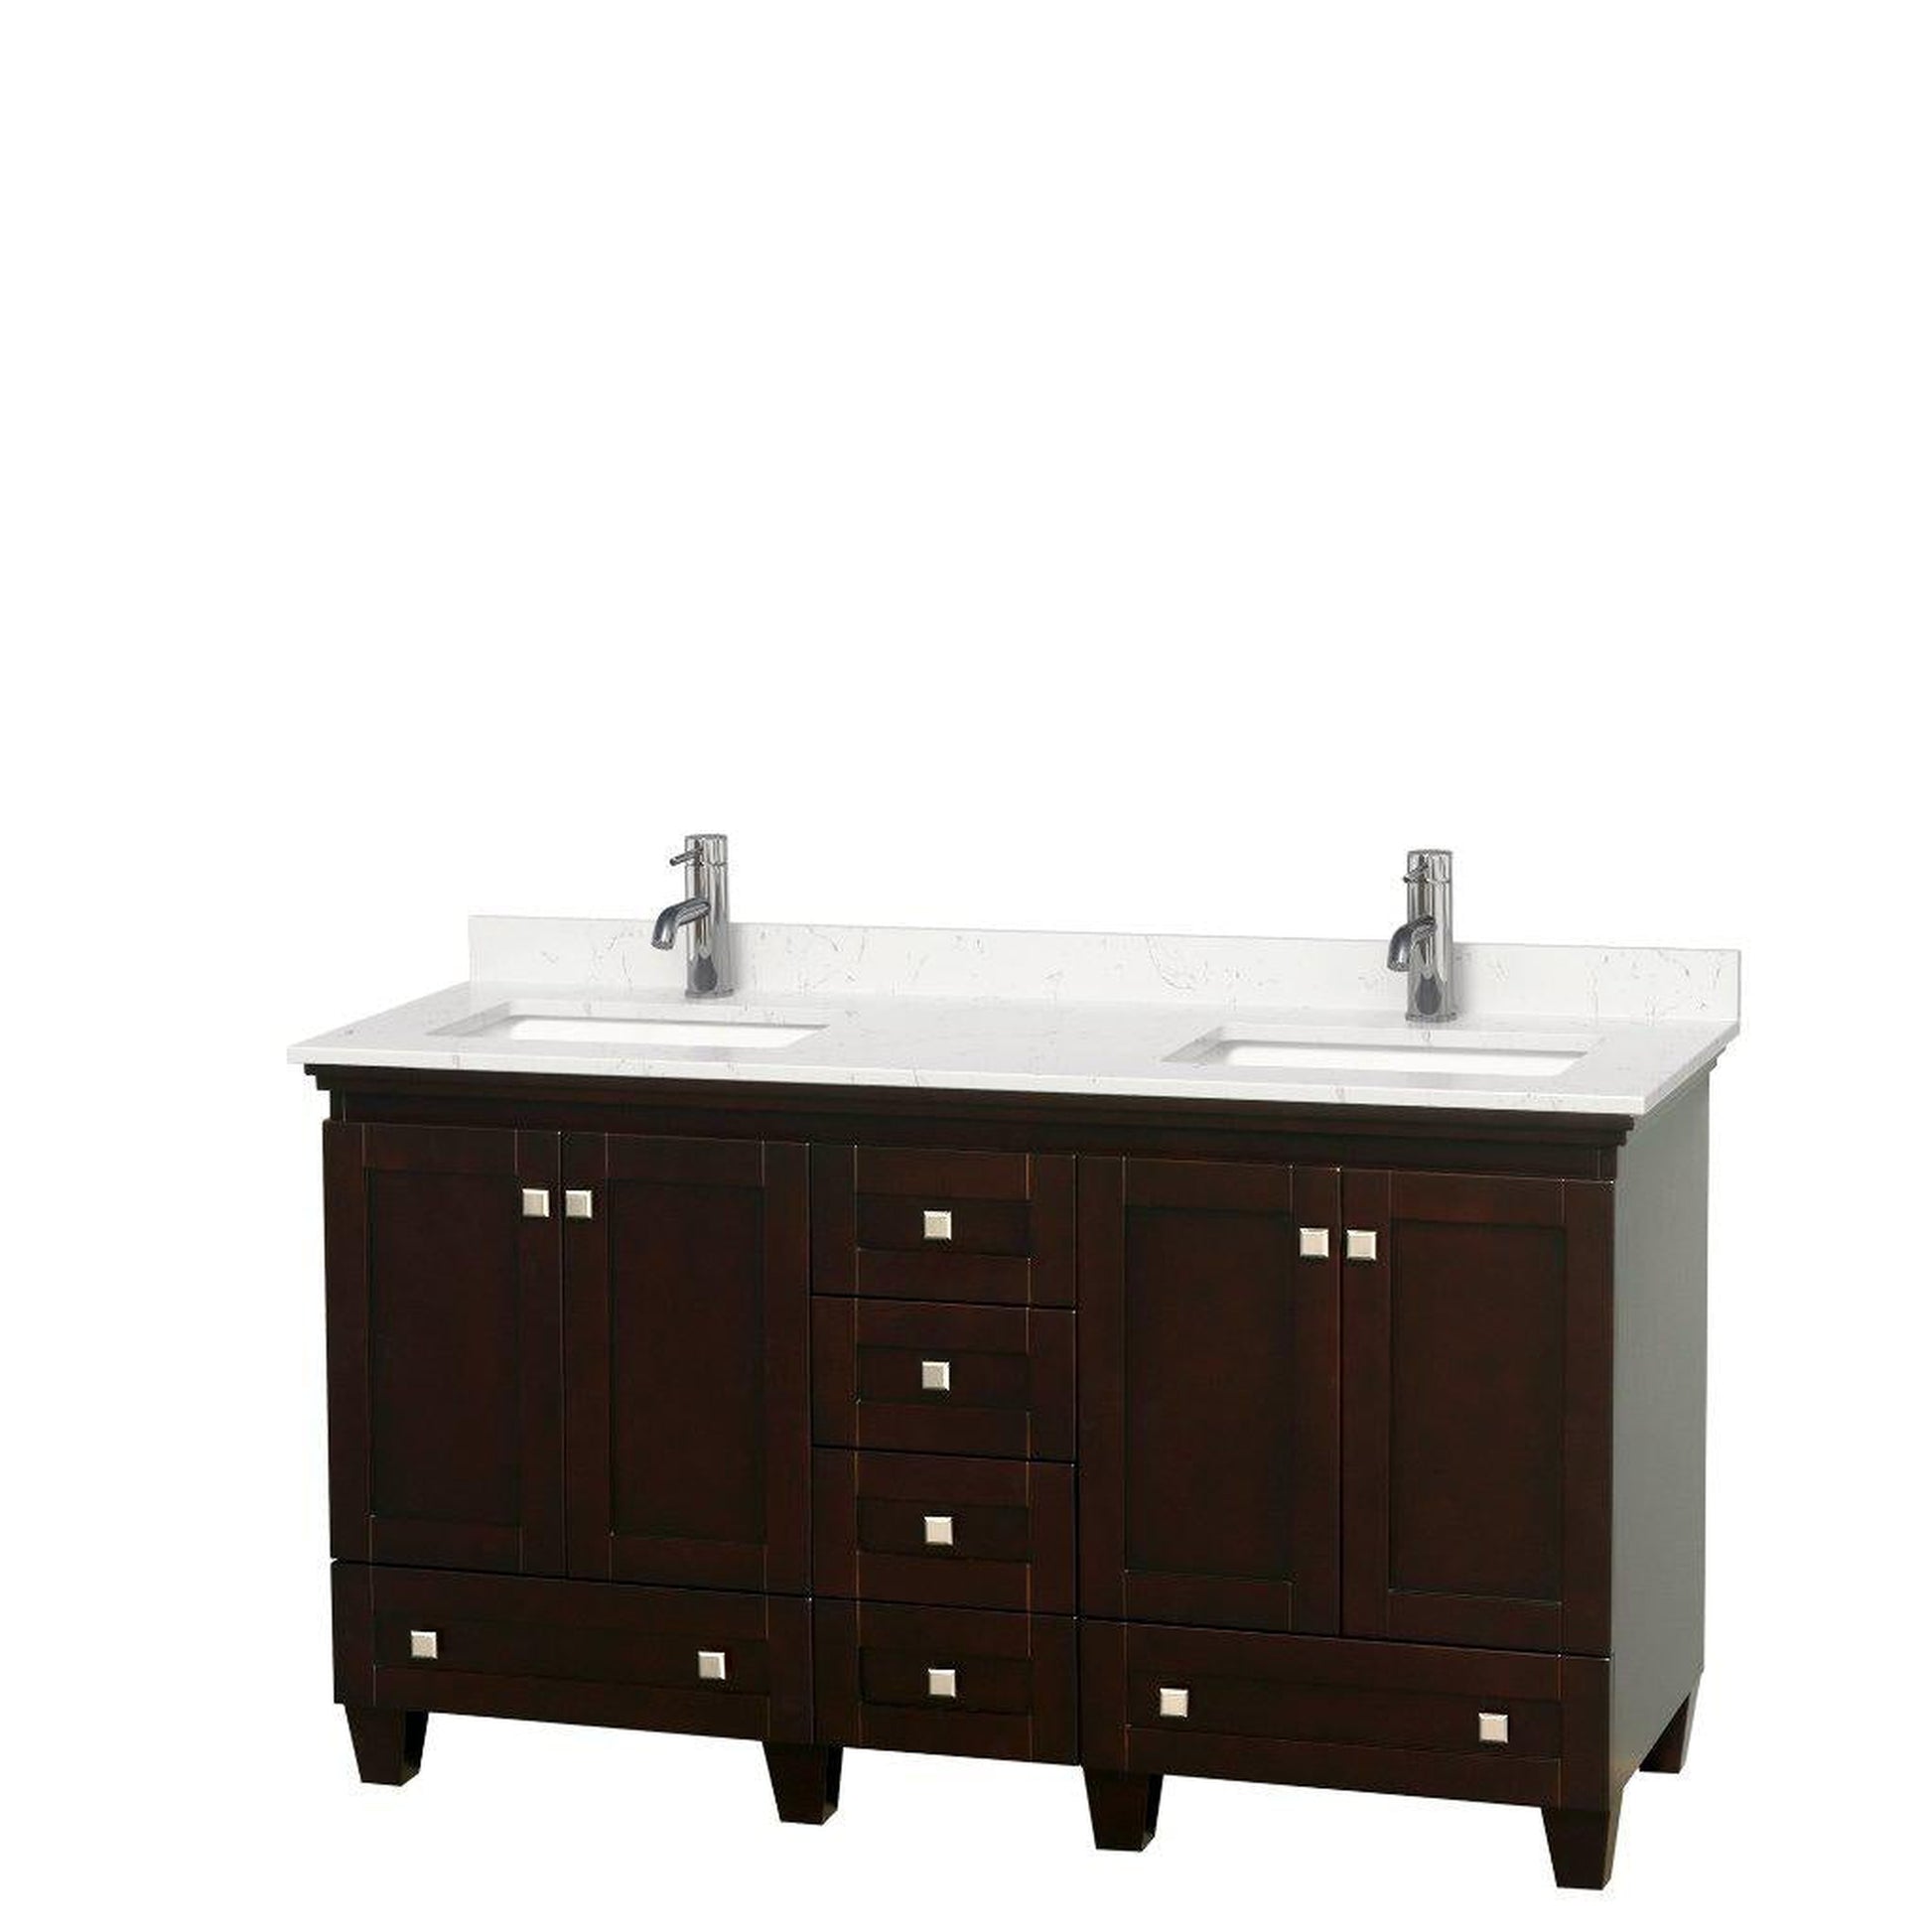 Wyndham Collection Acclaim 60" Double Bathroom Espresso Vanity With Light-Vein Carrara Cultured Marble Countertop And Undermount Square Sinks